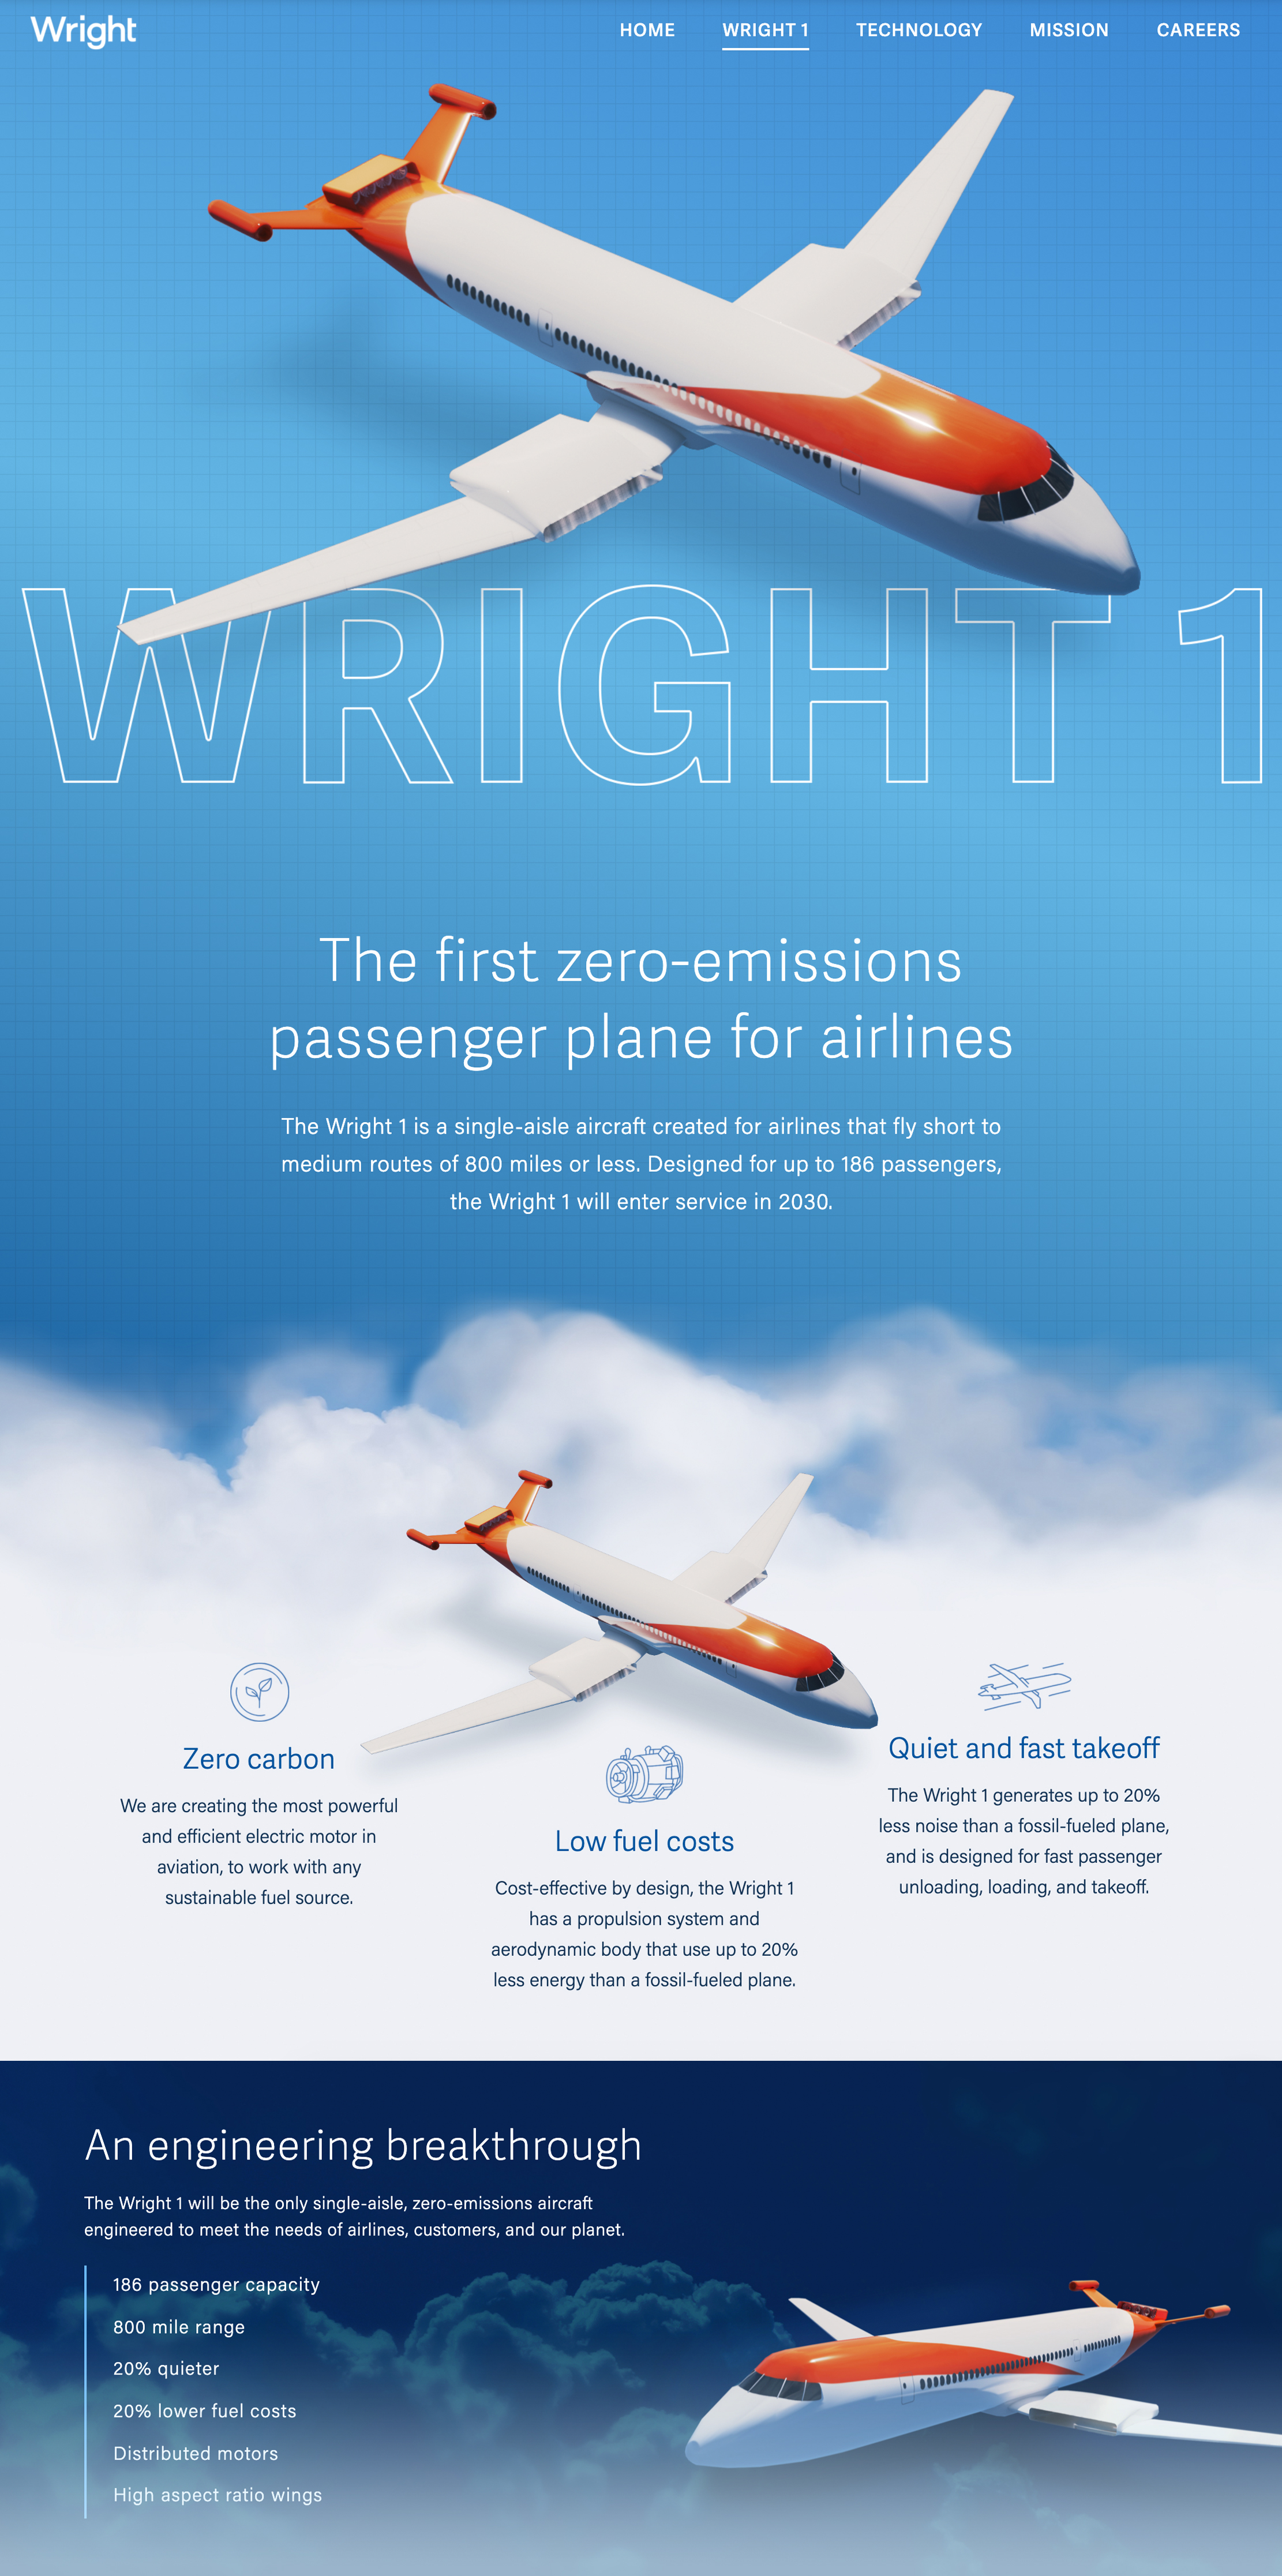 A sharp informational website for Wright Electric, a zero-emissions commercial airplane company.